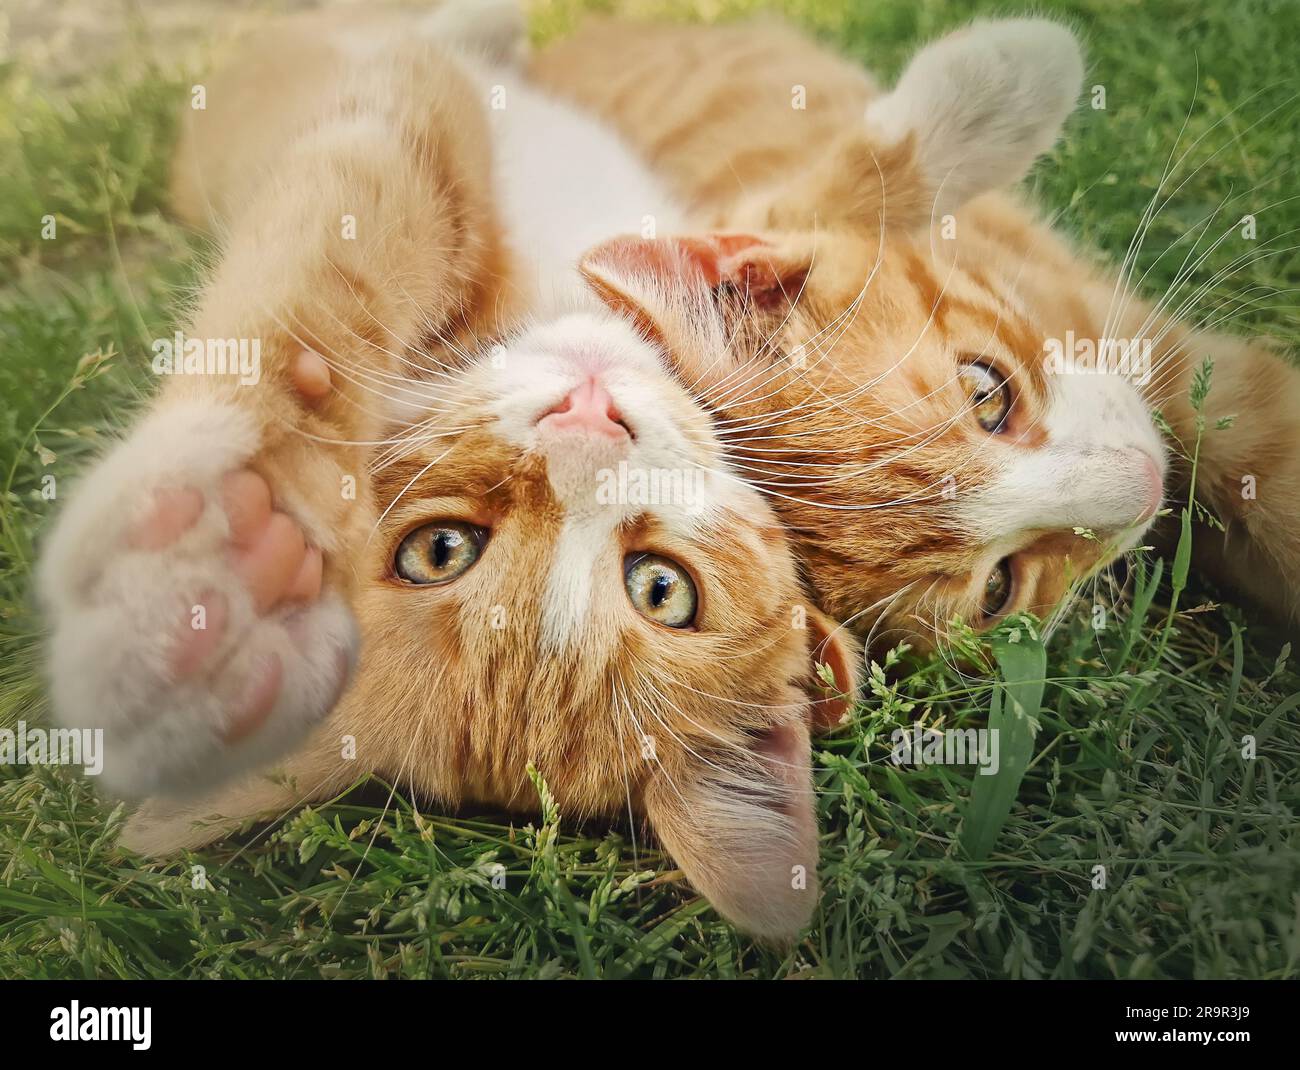 Two orange kittens playing together outdoors on the grass. Funny and playful ginger cats fighting games, biting and hugging Stock Photo